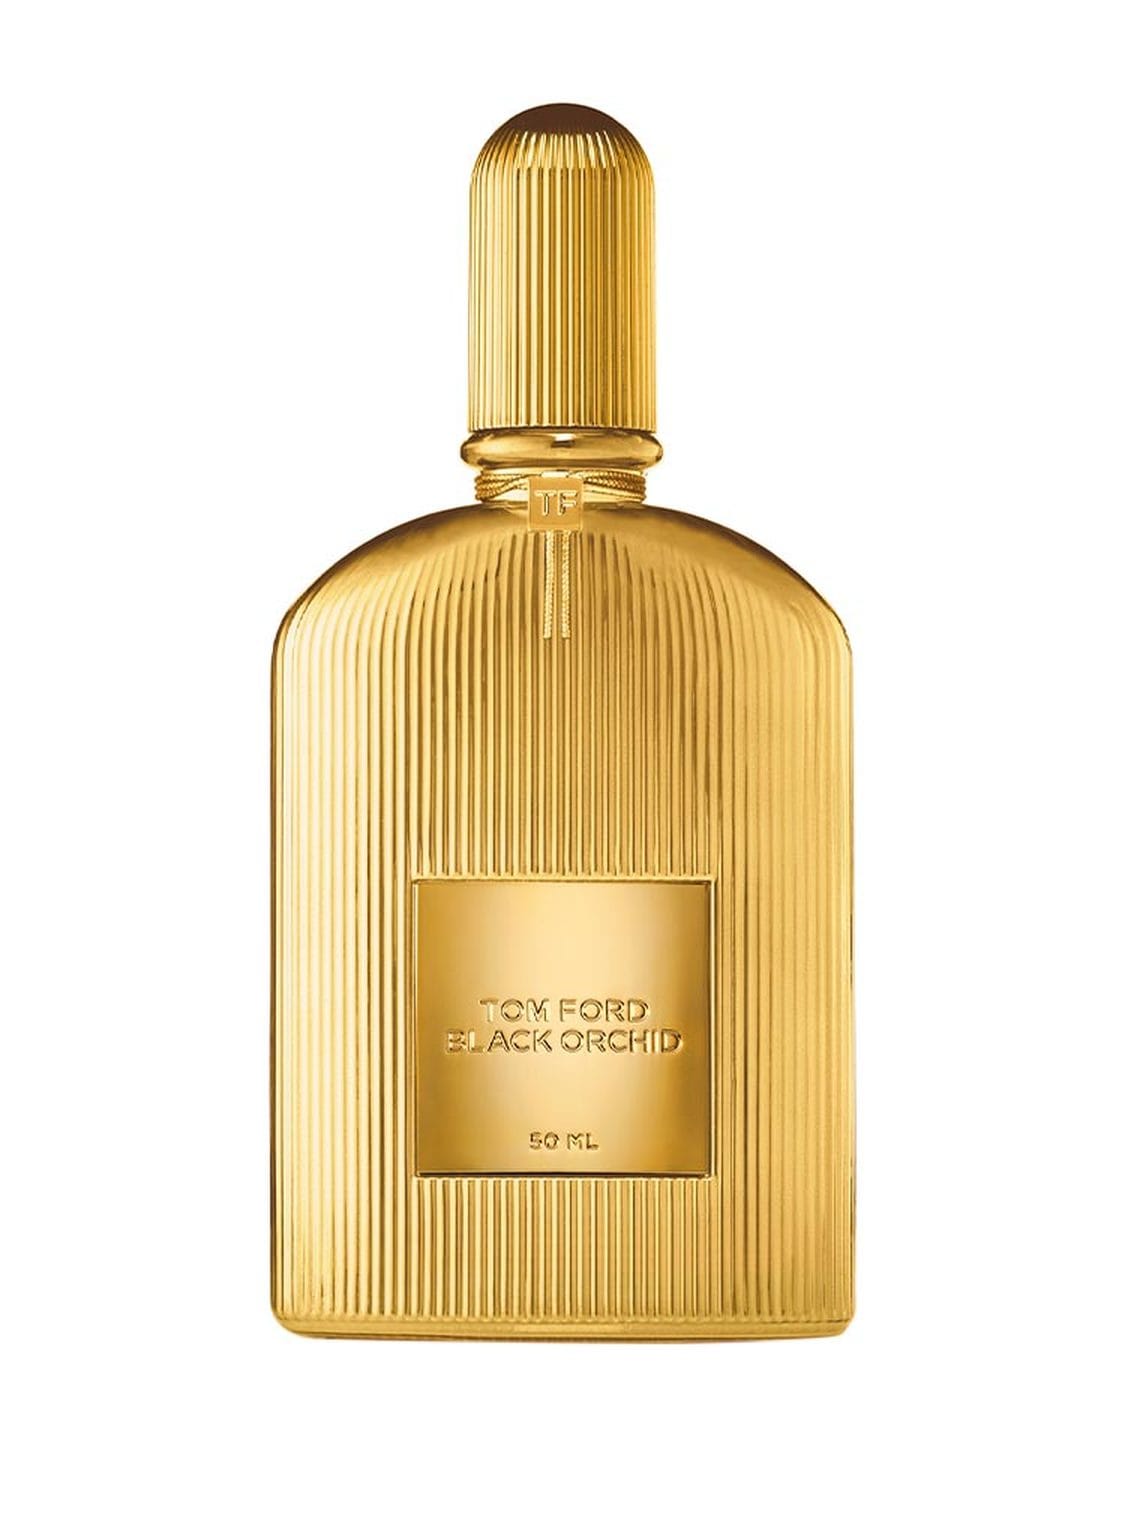 Tom Ford Beauty Black Orchid Parfum 50 ml von TOM FORD BEAUTY